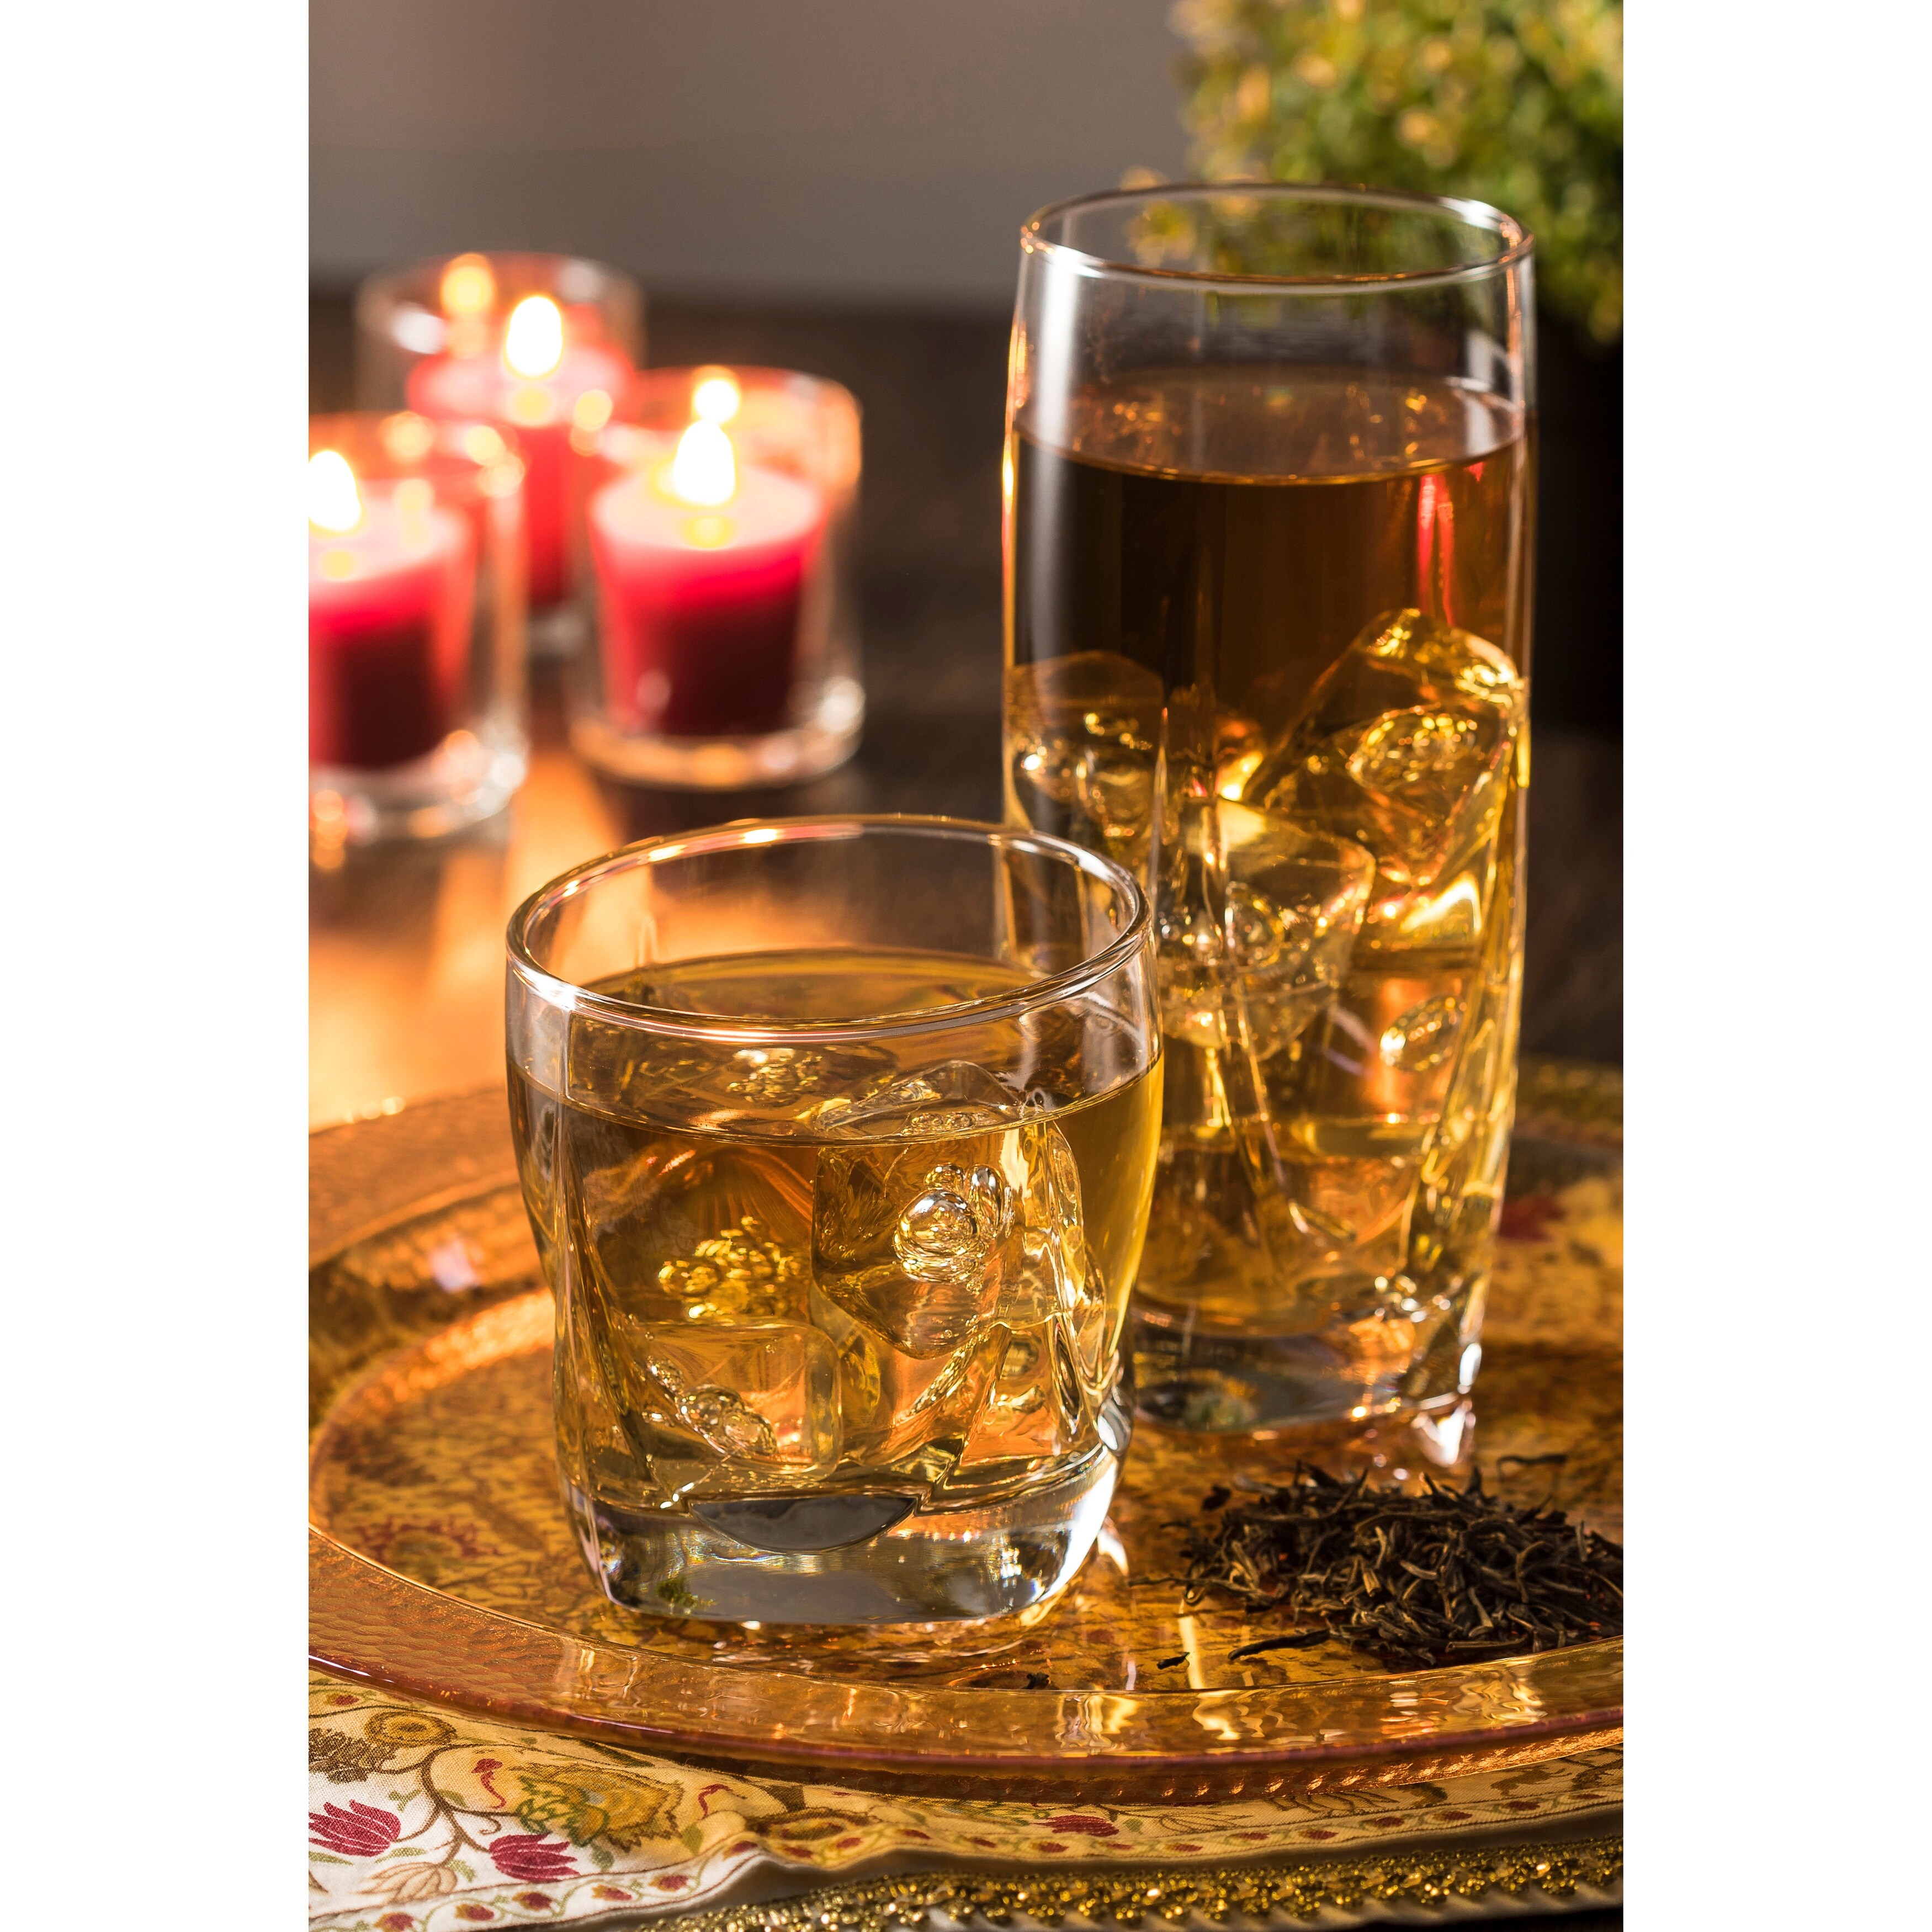 https://ak1.ostkcdn.com/images/products/is/images/direct/b55e947018b8a99d8284e44a73a1086e02fd7067/Libbey-Imperial-16-Piece-Tumbler-and-Rocks-Glass-Set.jpg